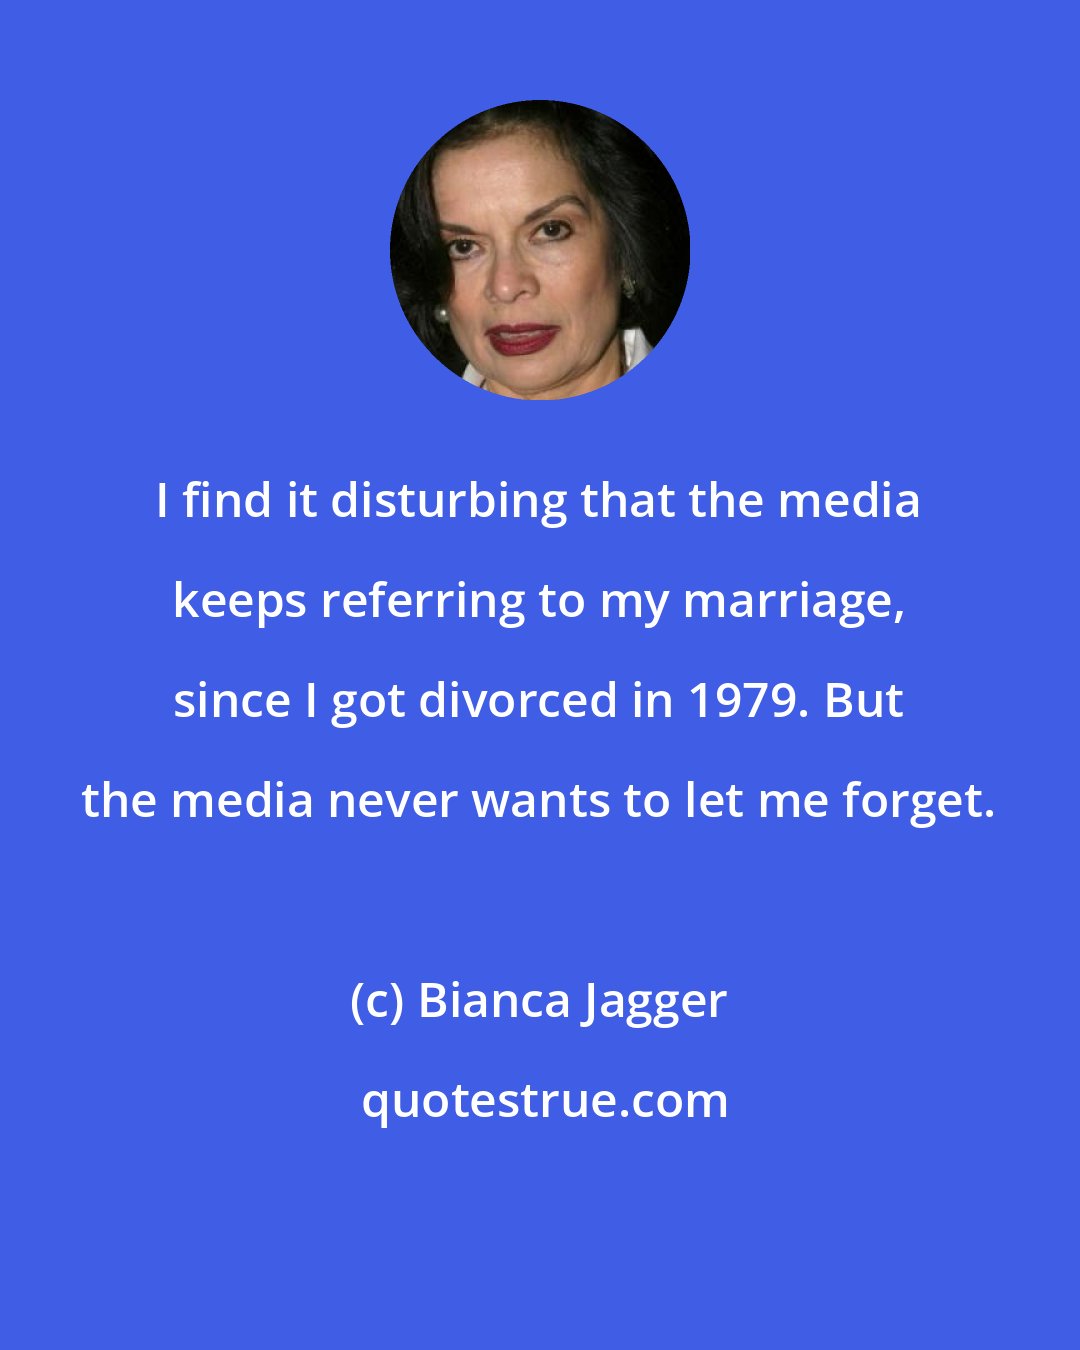 Bianca Jagger: I find it disturbing that the media keeps referring to my marriage, since I got divorced in 1979. But the media never wants to let me forget.